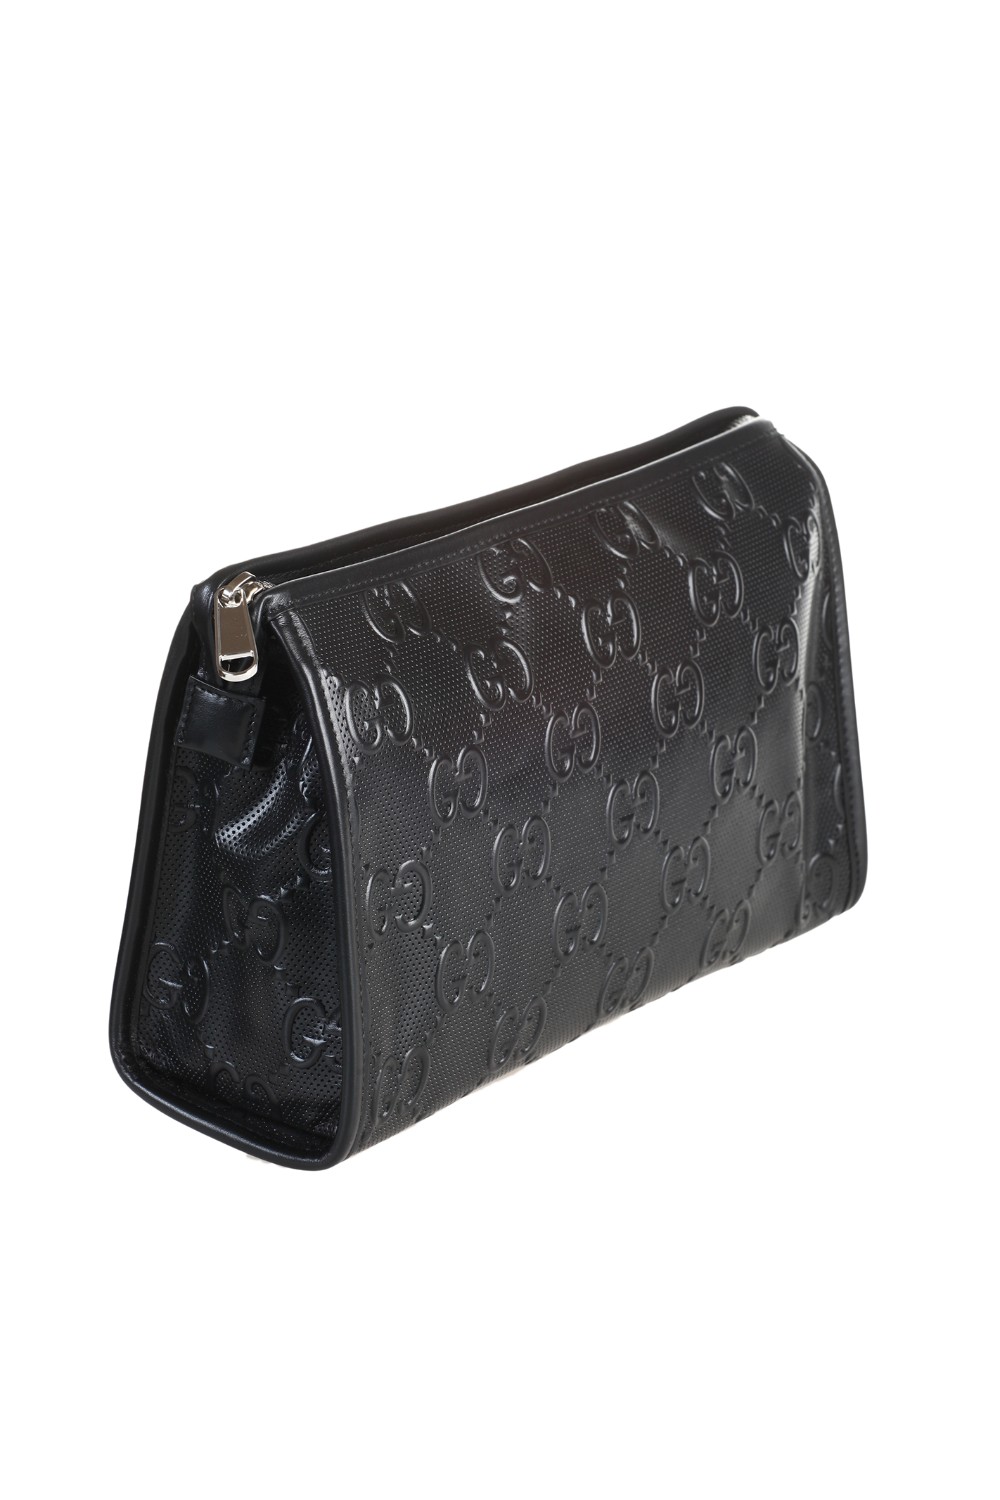 shop GUCCI  Beauty: Gucci beauty GG Embossed in pelle nera.
Finiture color argento.
Doppia G.
Chiusura con zip.
Dimensioni: L 18cm x A 11,5cm x P 3cm.
Made in Italy.. 625568 1W3AN-1000 number 4504945